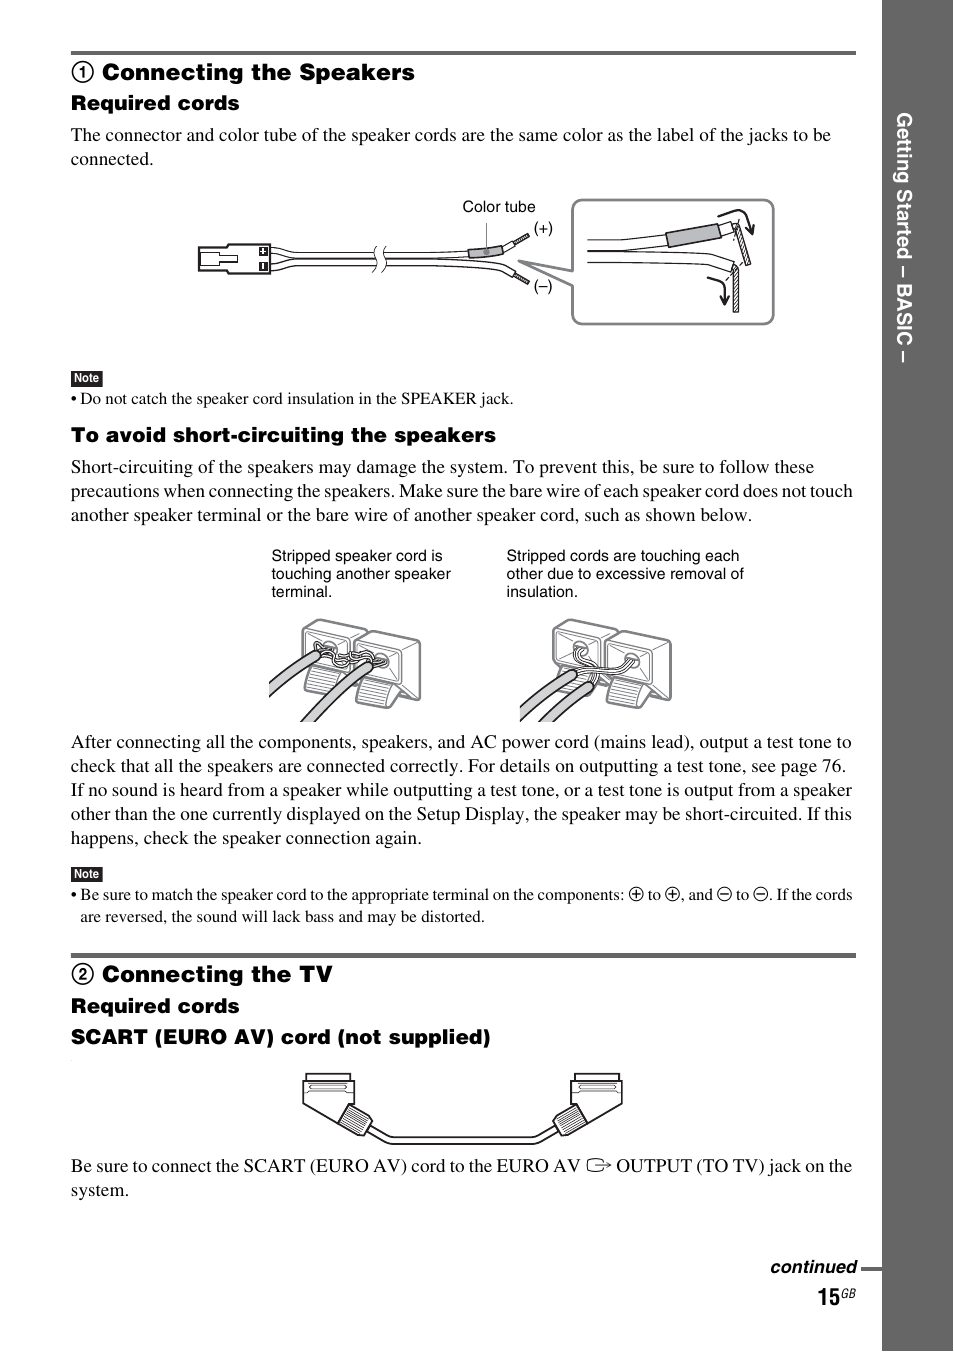 1 connecting the speakers, 2 connecting the tv, 1connecting the speakers | Sony  DAV-DZ410 User Manual | Page 15 / 100 | Original mode